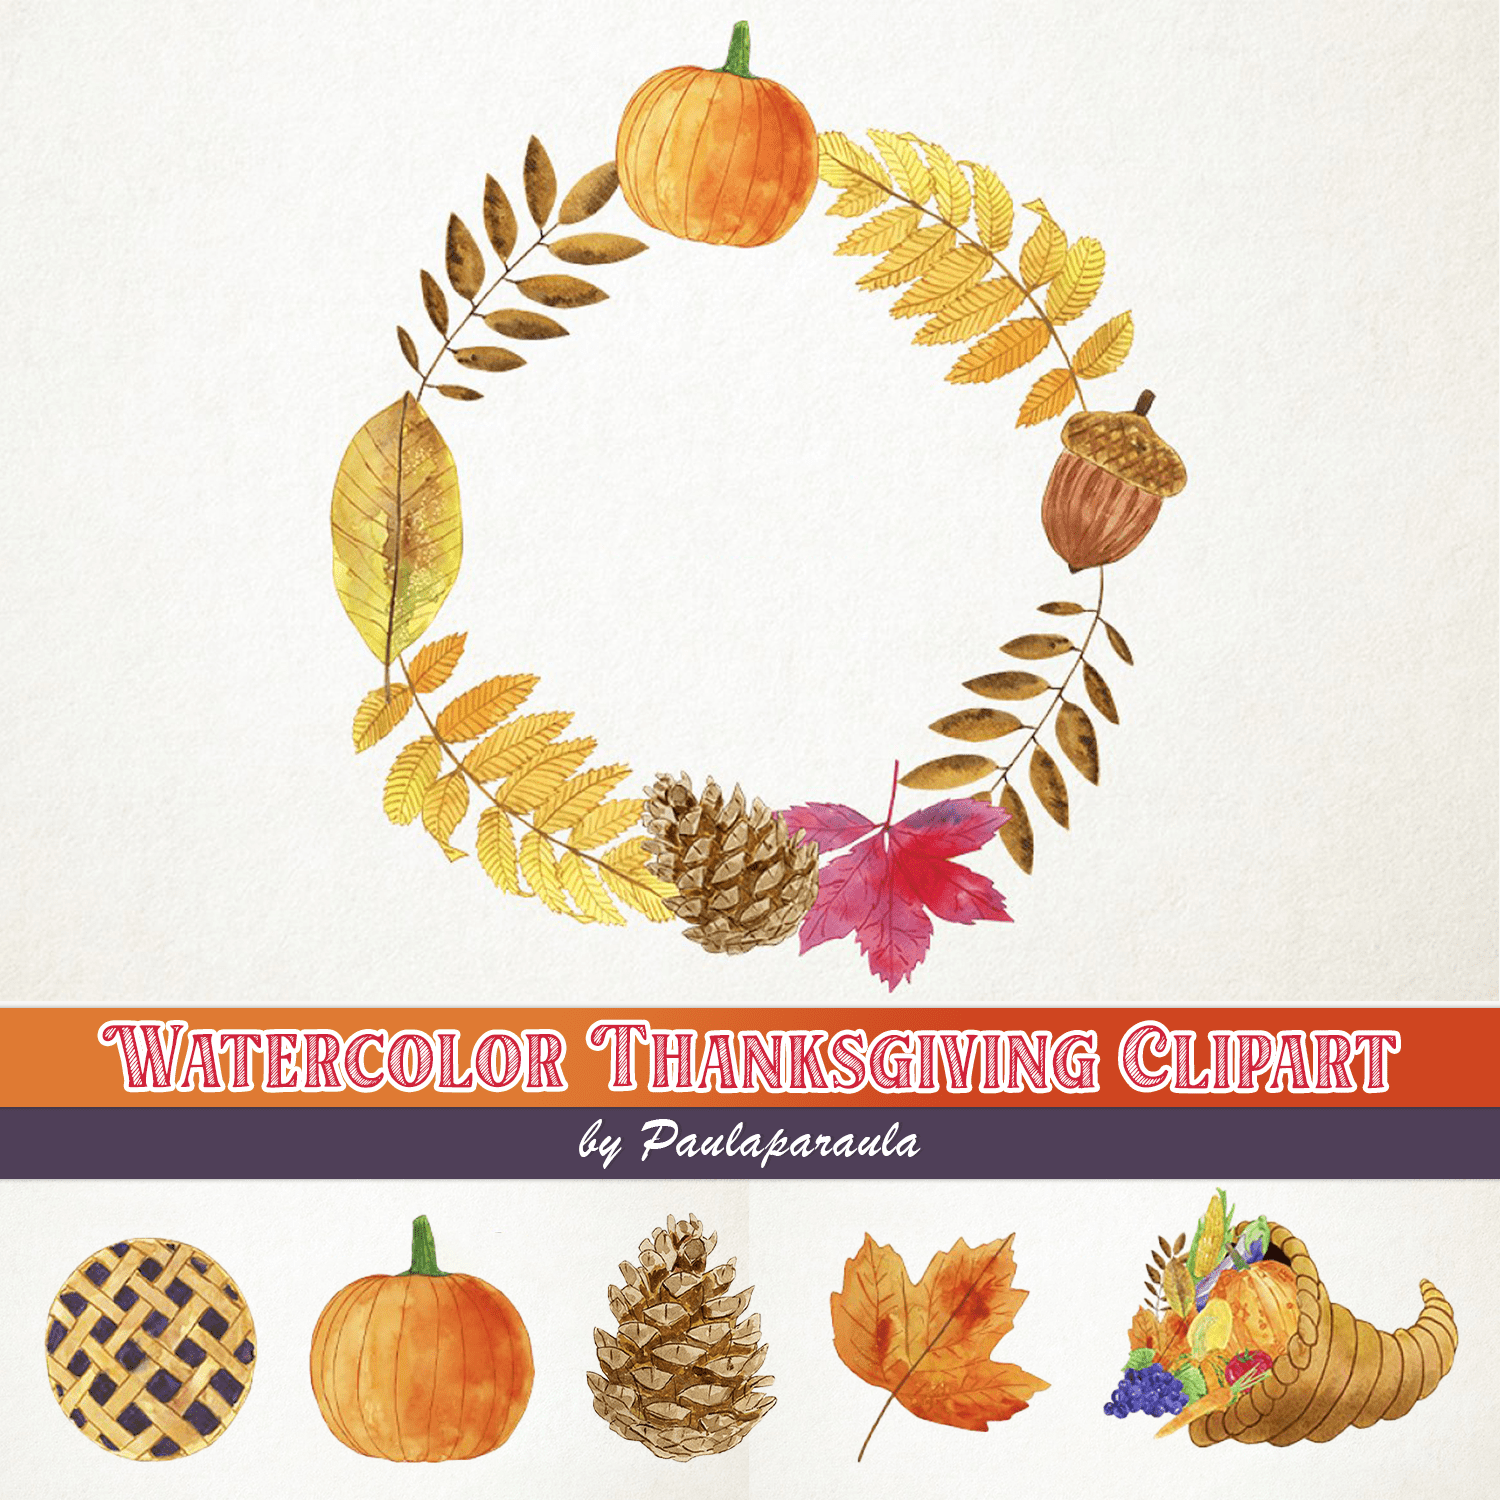 Watercolor Thanksgiving Clipart cover.